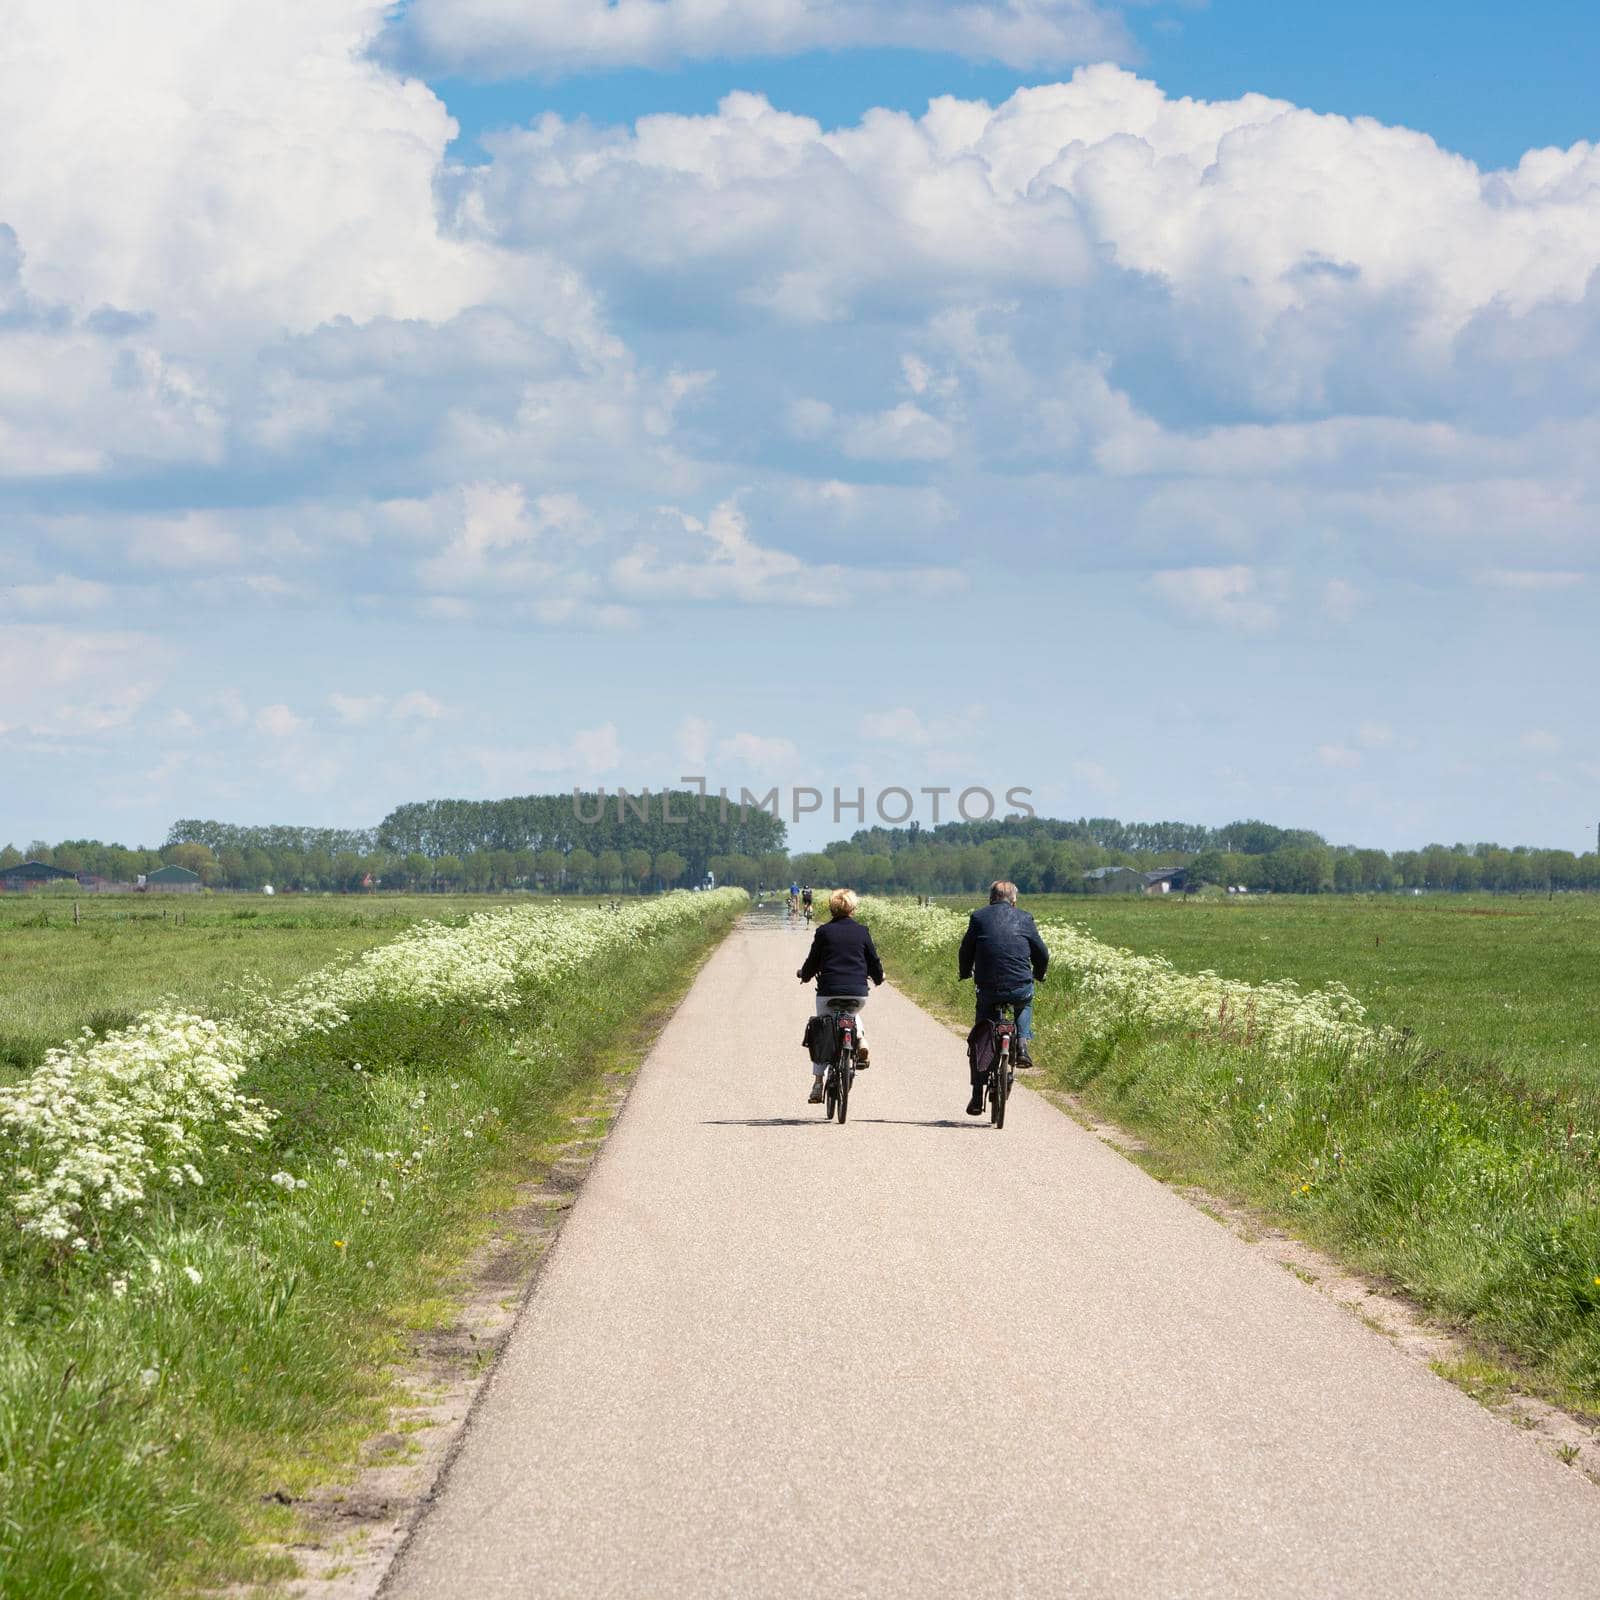 couple on bicycle passes white summer flowers on country road near meadows in the netherlands under blue summer sky with white clouds